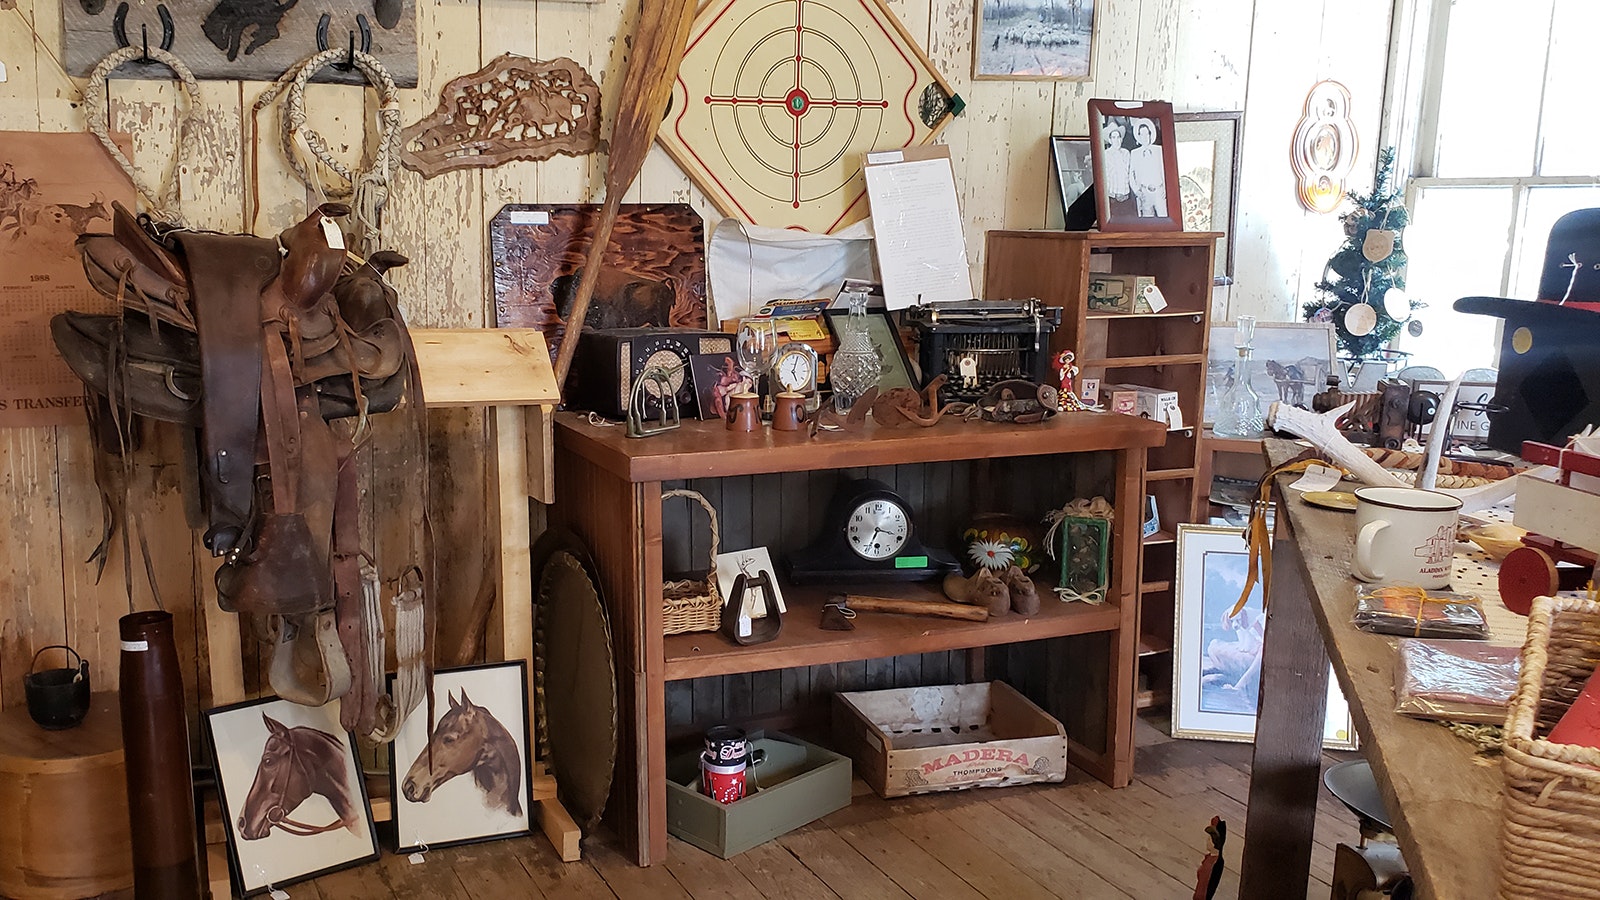 Saddles, pictures of horses, time pieces and more for sale at the Aladdin General Store.